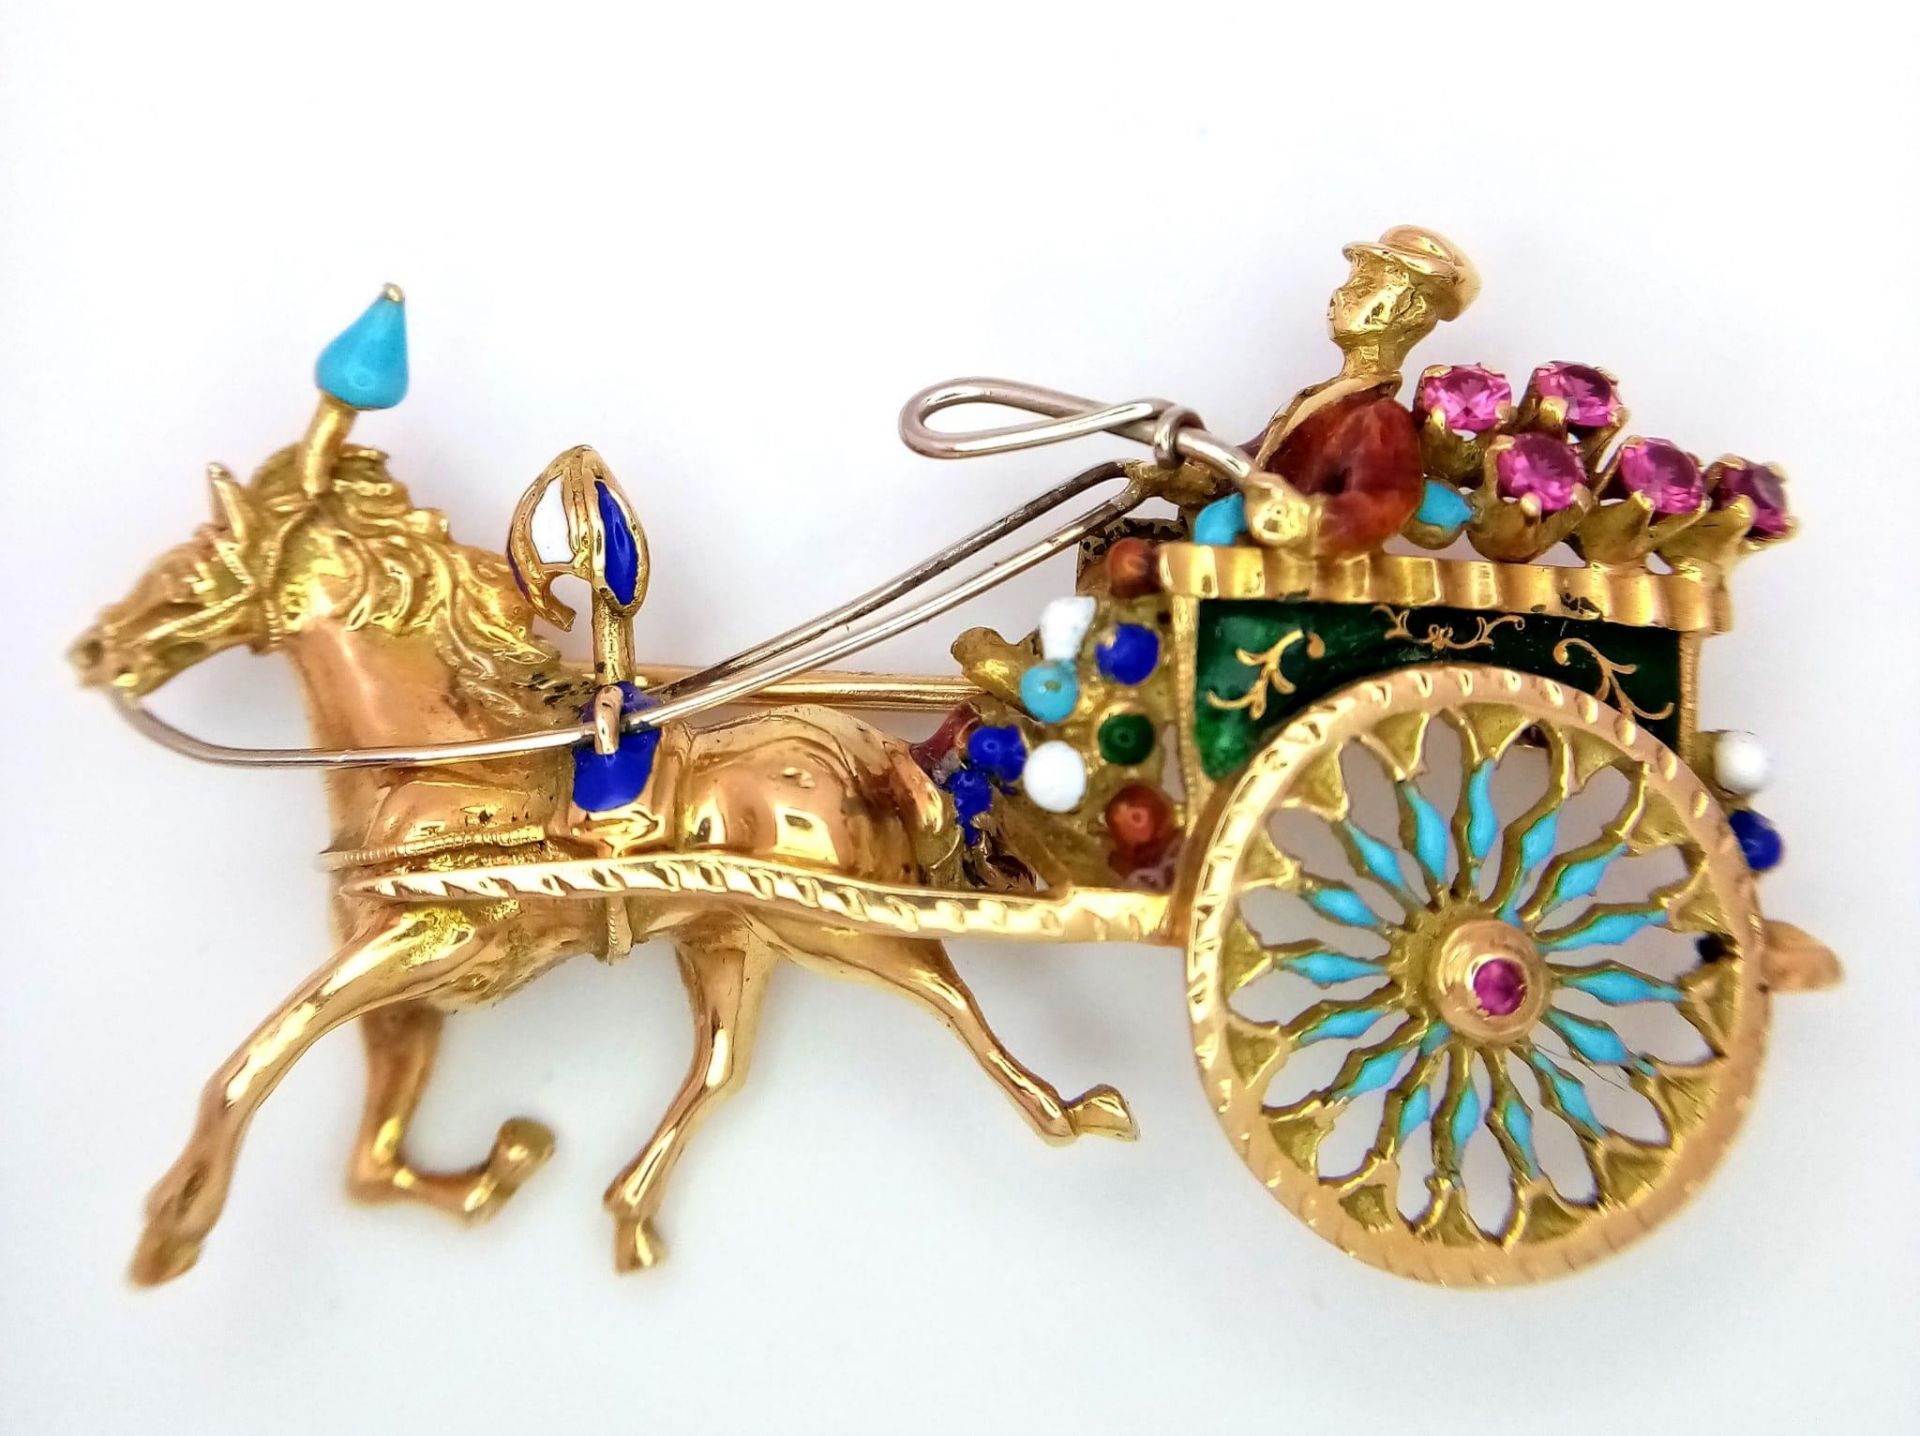 A Vintage 18K Yellow Gold Gemstone and Enamel Horse with Carriage Brooch. Incredible detail with - Image 2 of 8